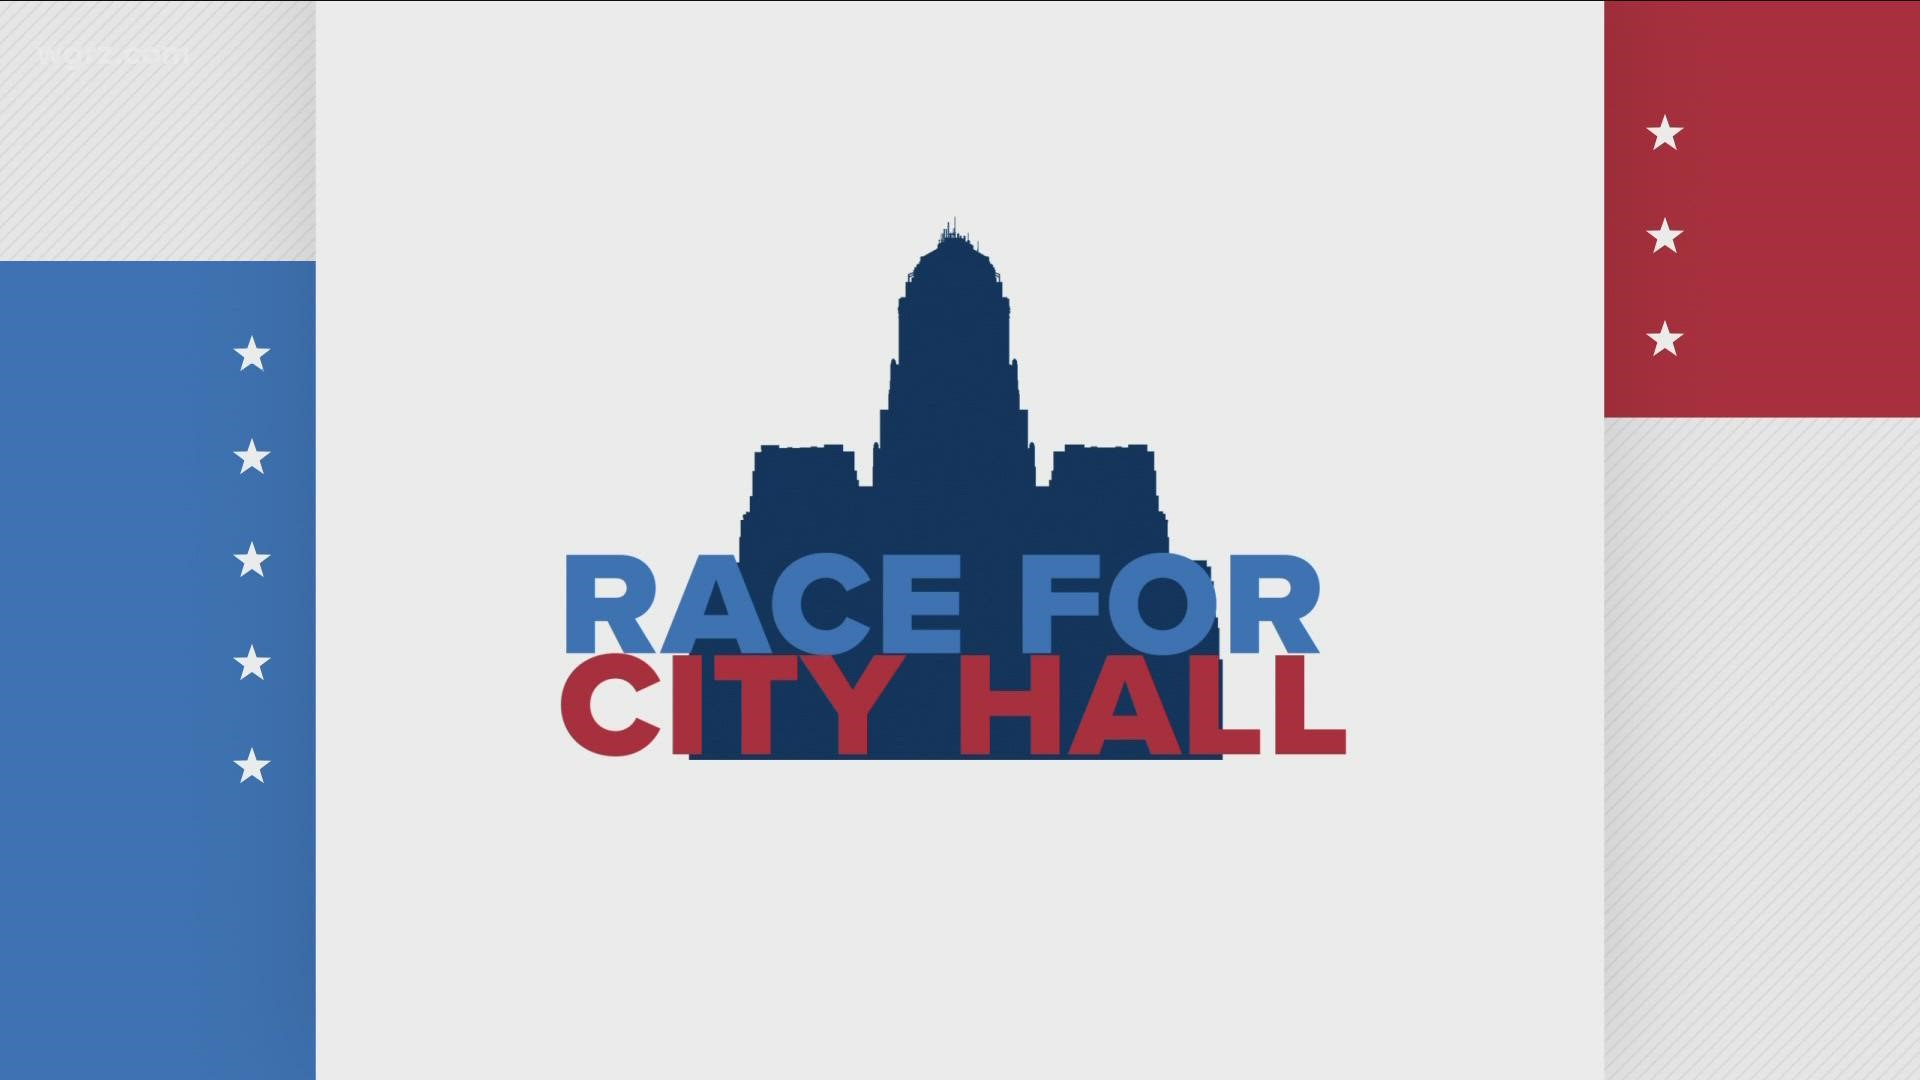 Democratic Primary winner India Walton, incumbent Mayor Byron Brown, attorney Benjamin Carlisle and Jaz Miles will all be on stage next Thursday.